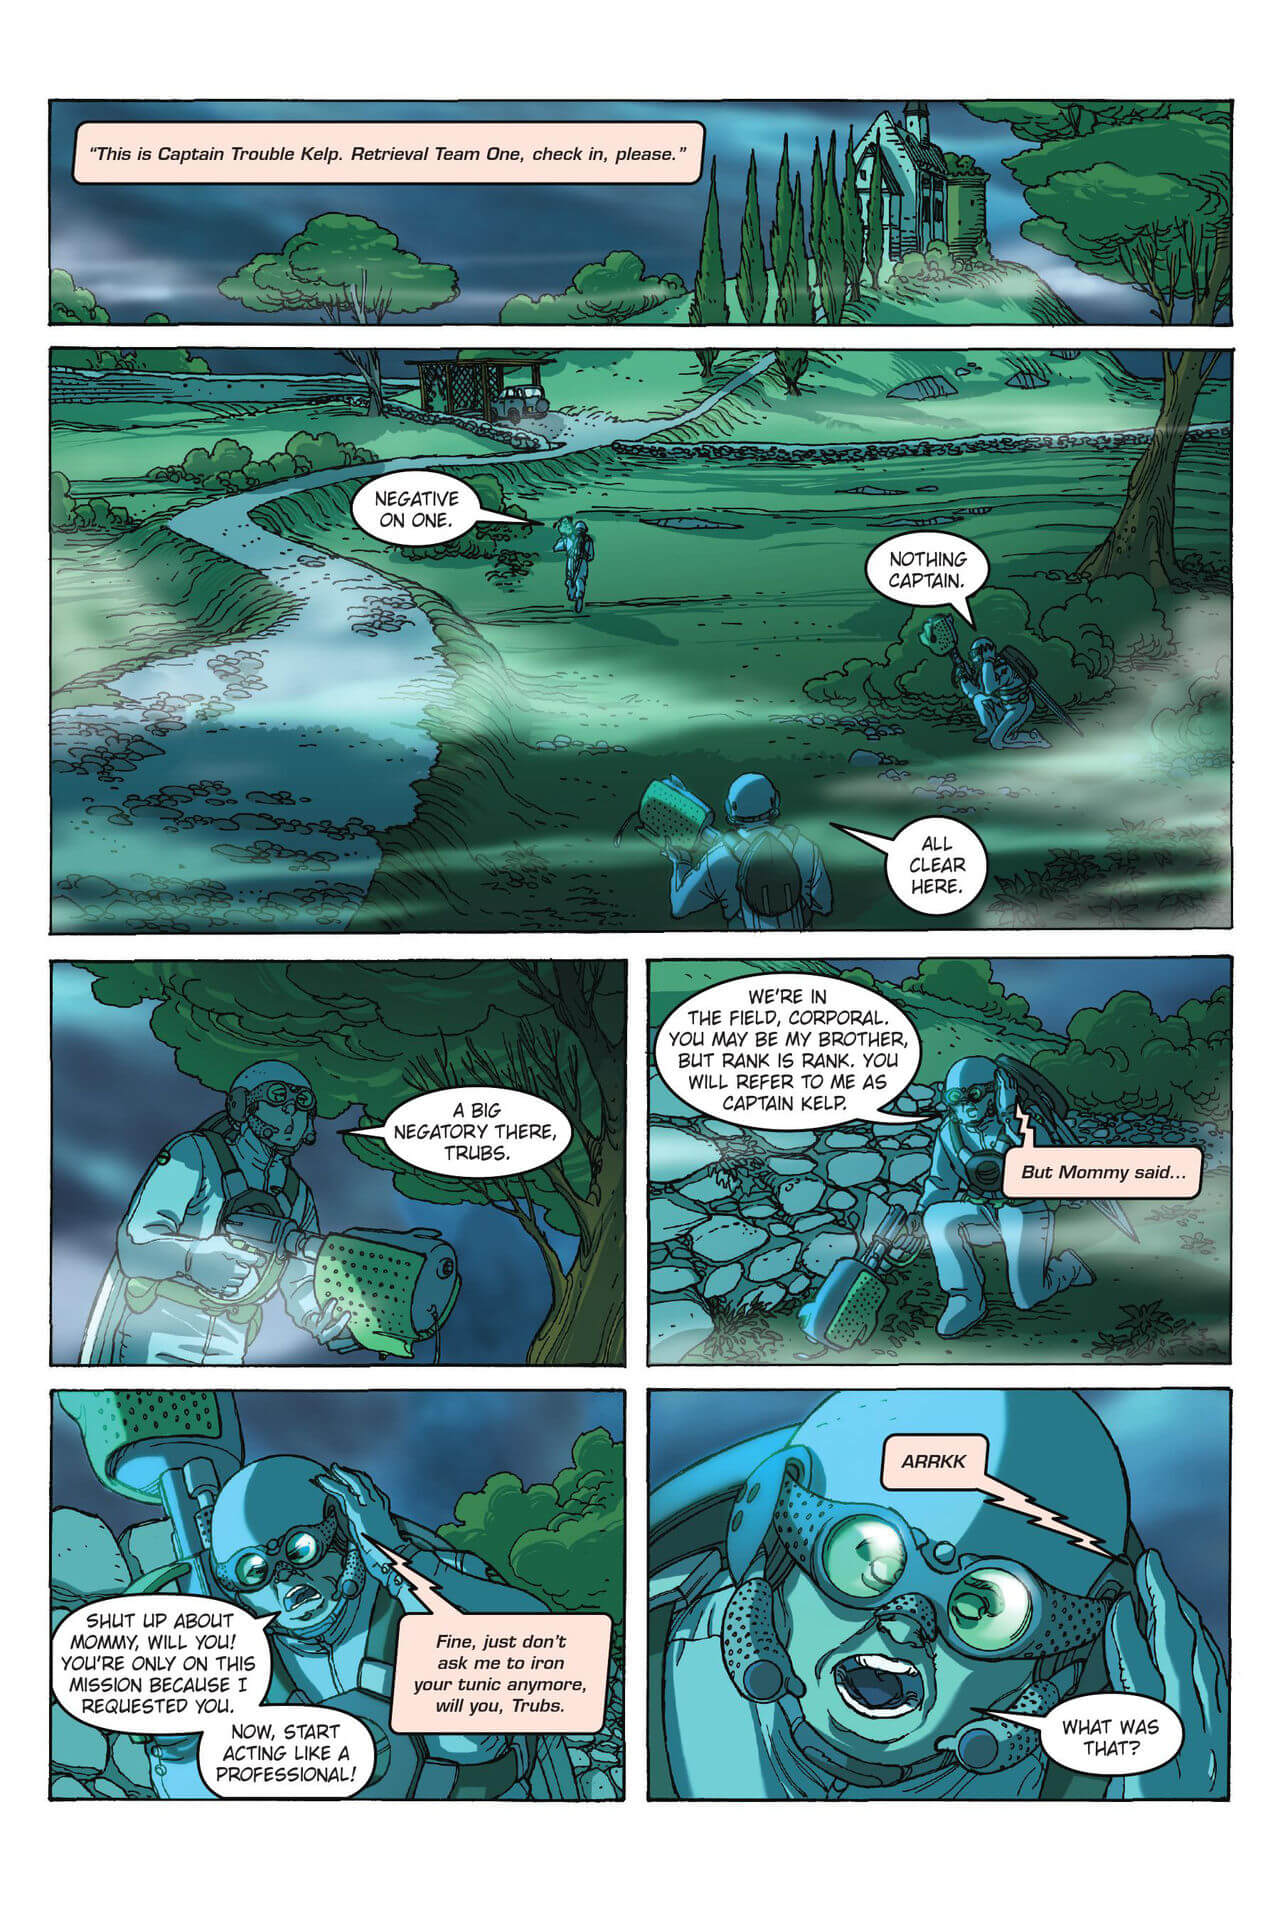 page 53 of artemis fowl the graphic novel